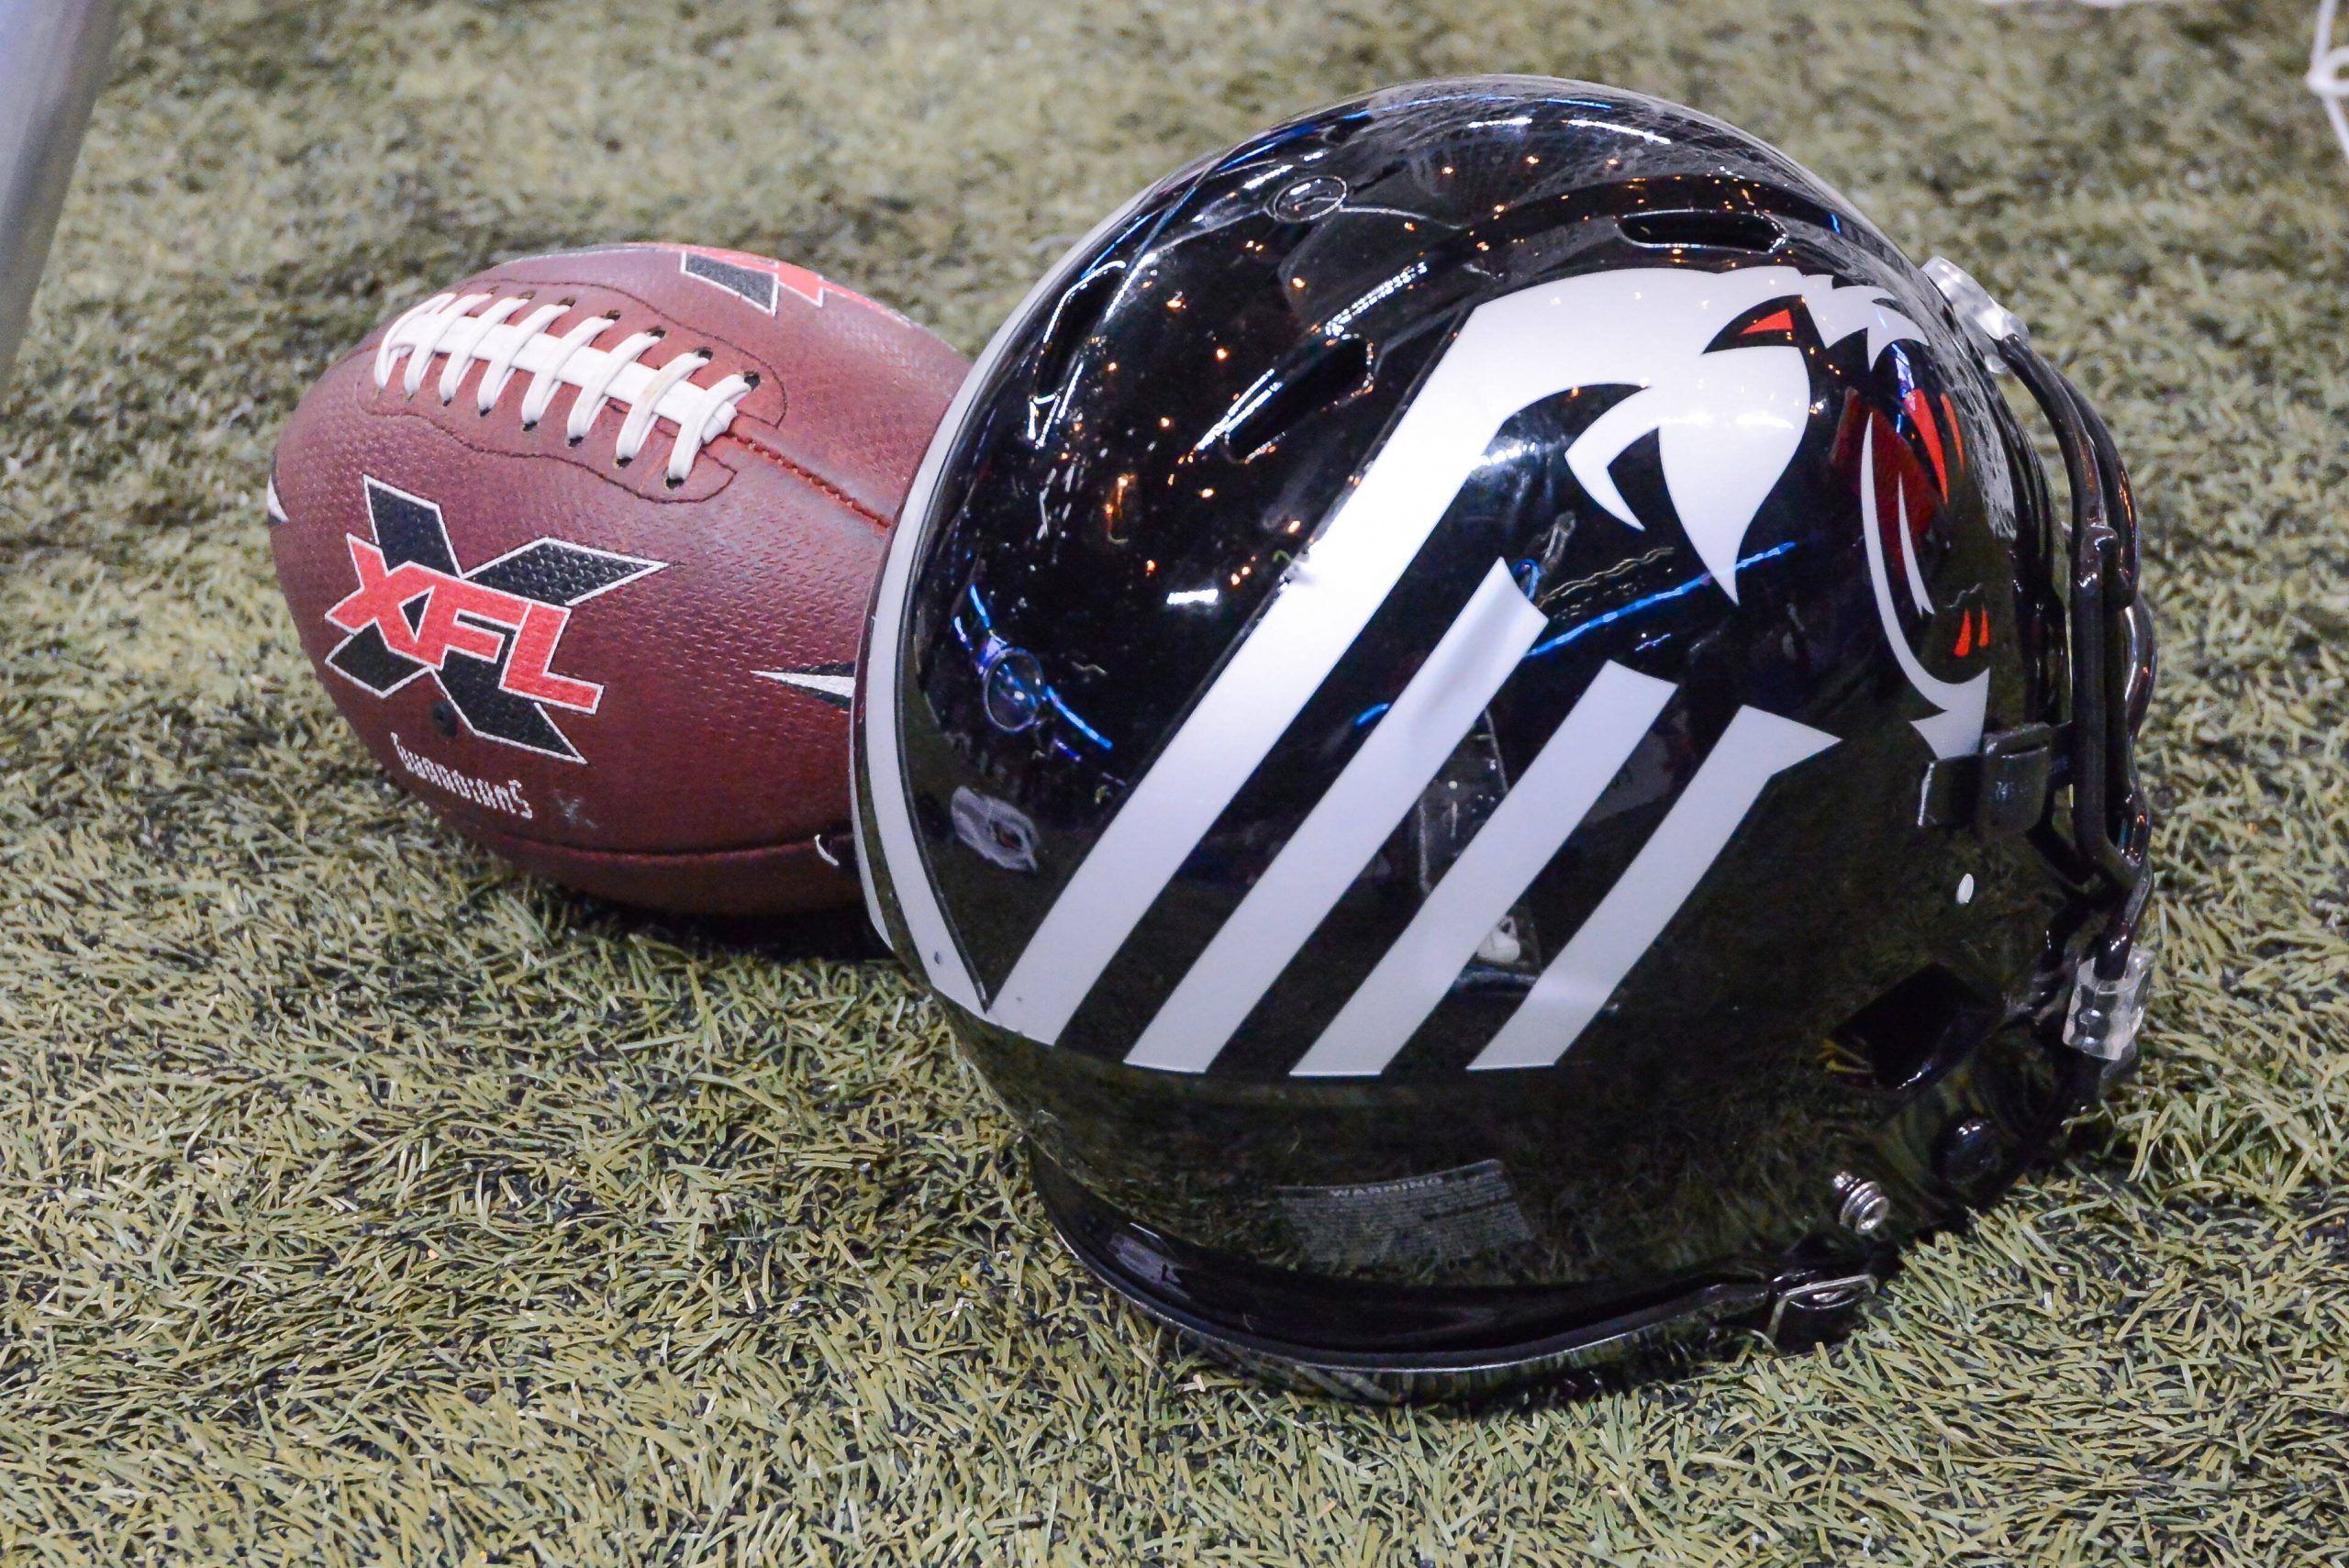 Feb 23, 2020: A New York helmet sits next to a XFL game ball in a game where the NY Guardians visit